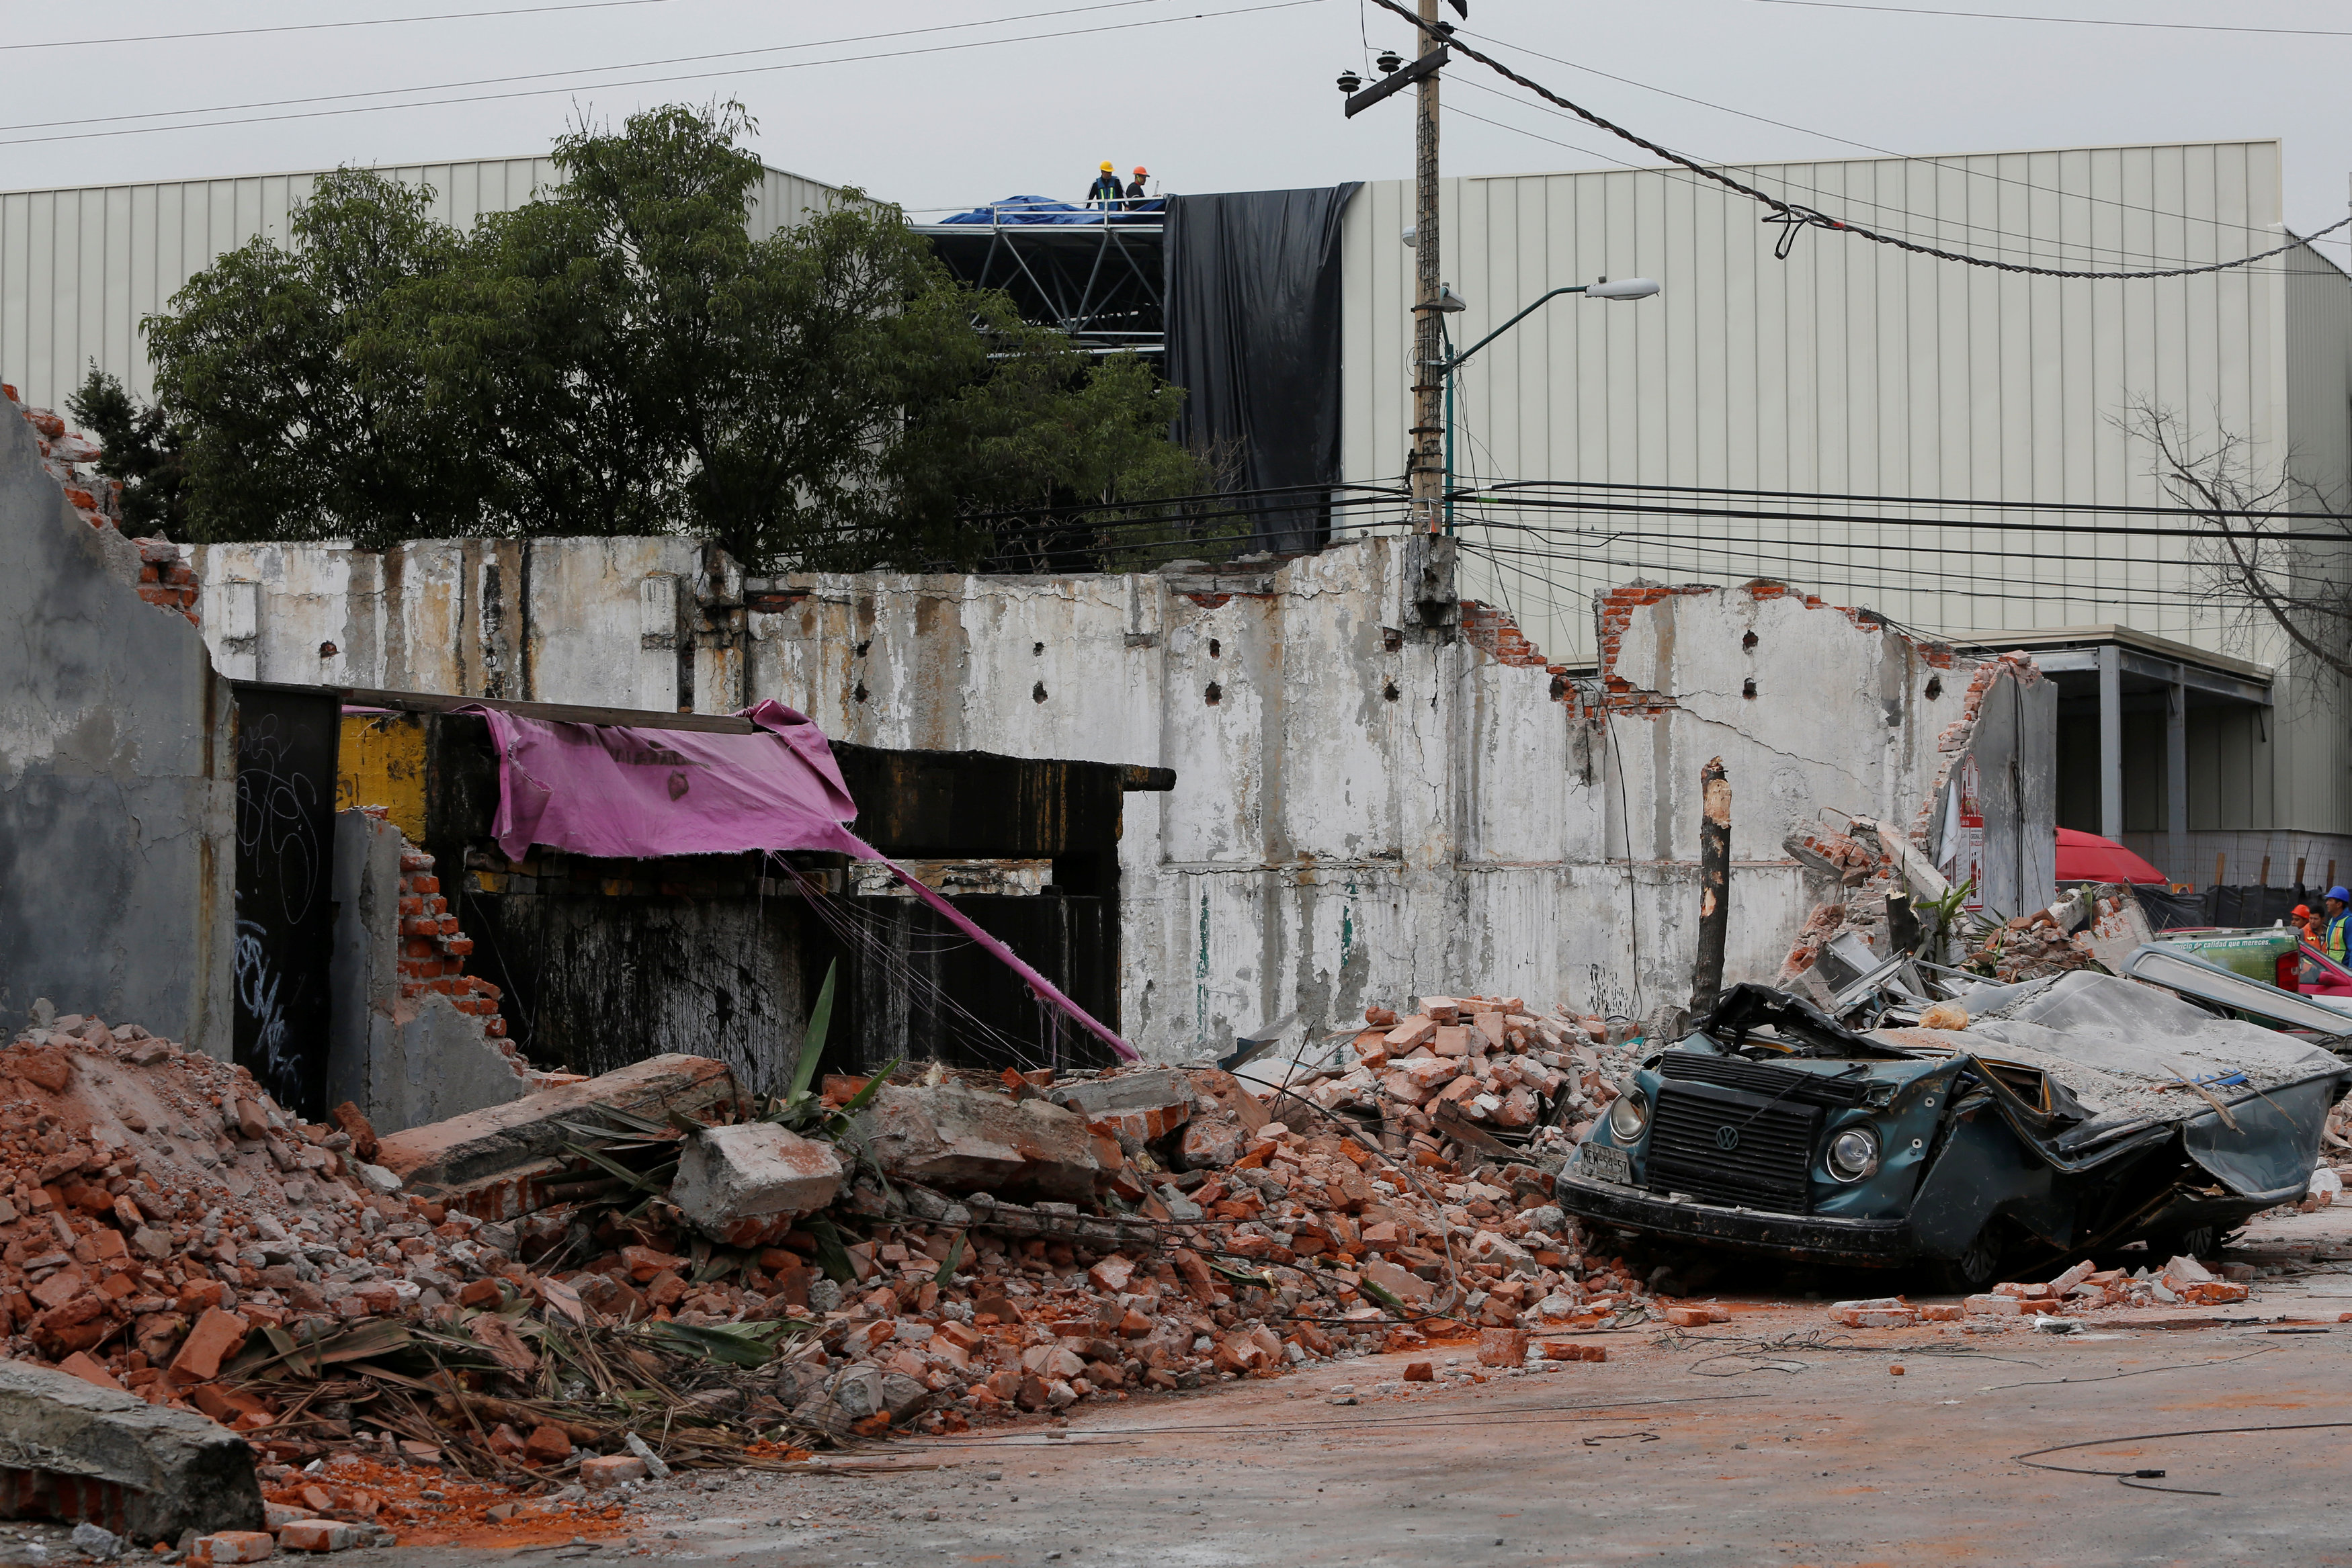 A damaged wall and a smashed vehicle are pictured after an earthquake in Mexico City, Mexico on Sept. 8, 2017. (REUTERS/Carlos Jasso)